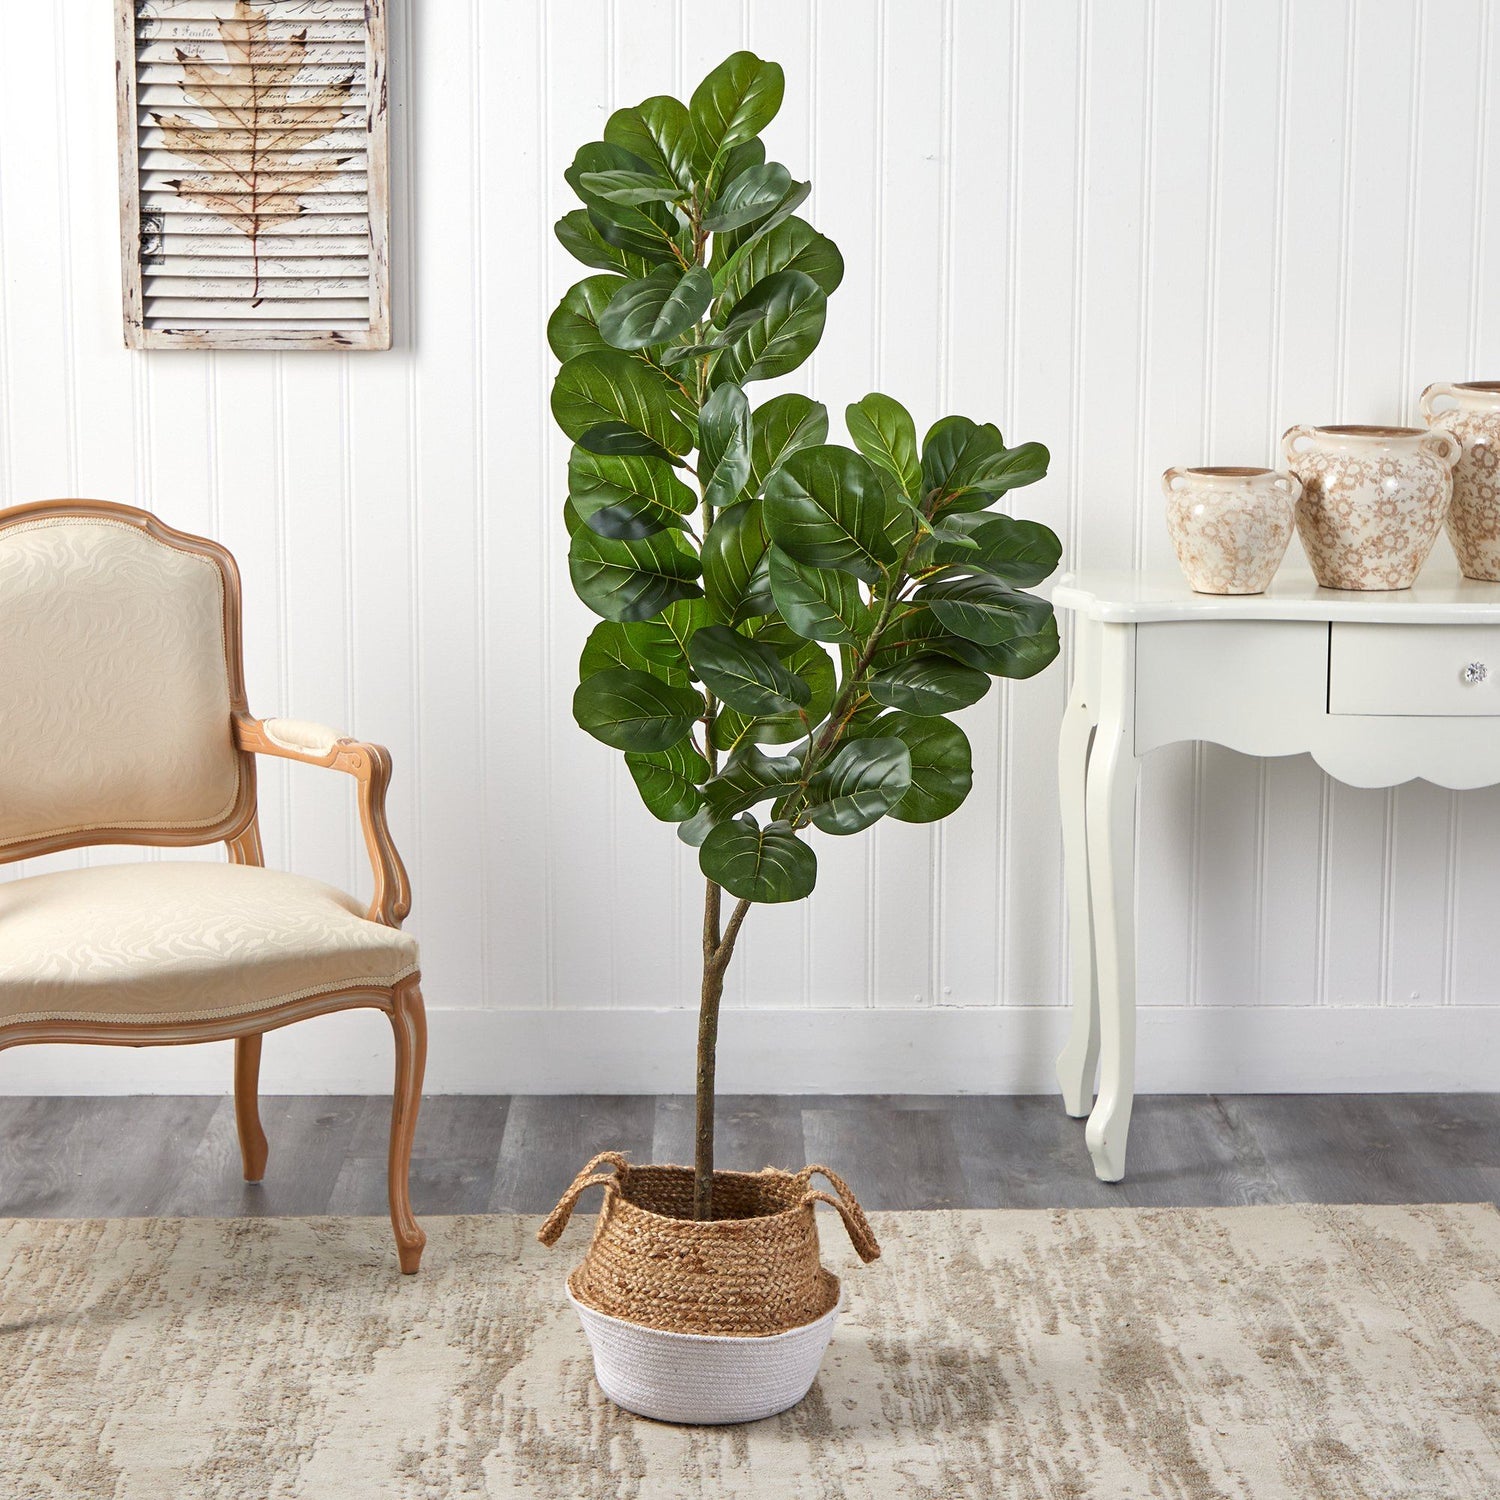 4.5’ Fiddle Leaf Fig Artificial Tree with Boho Chic Handmade Cotton & Jute White Woven Planter